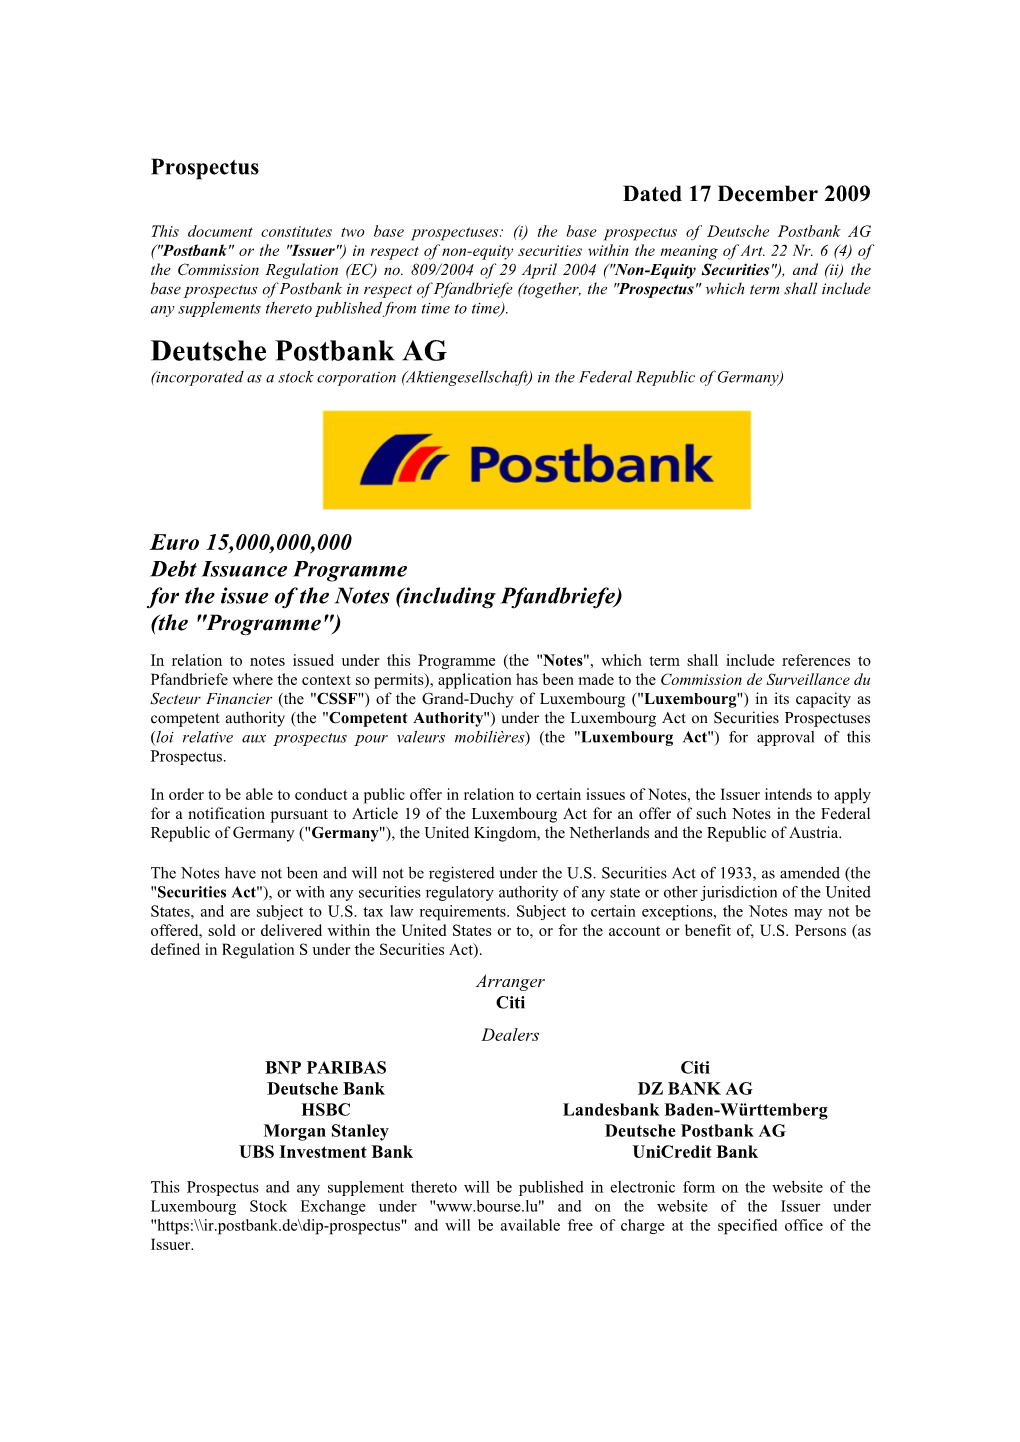 Deutsche Postbank AG ("Postbank" Or the "Issuer") in Respect of Non-Equity Securities Within the Meaning of Art